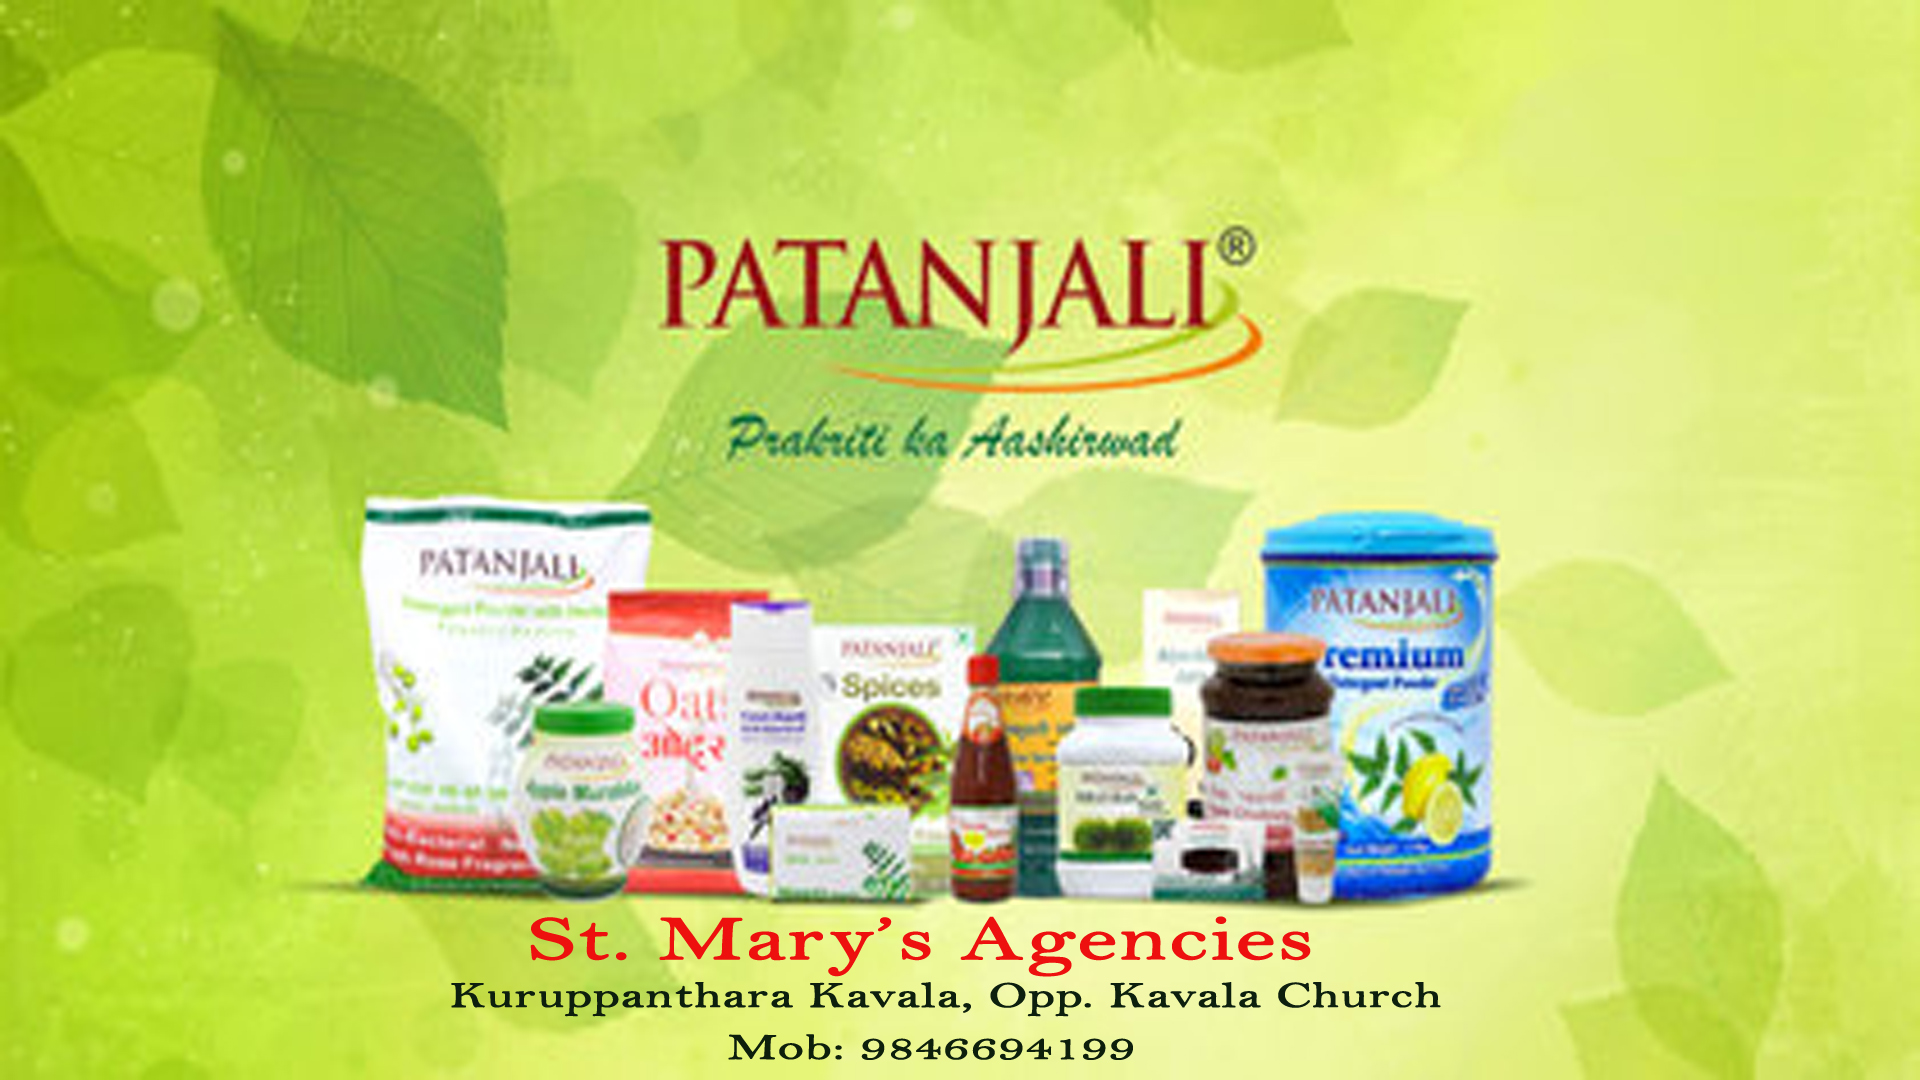 Saint Mary's Agencies - Patanjali Ayurved , HD Wallpaper & Backgrounds